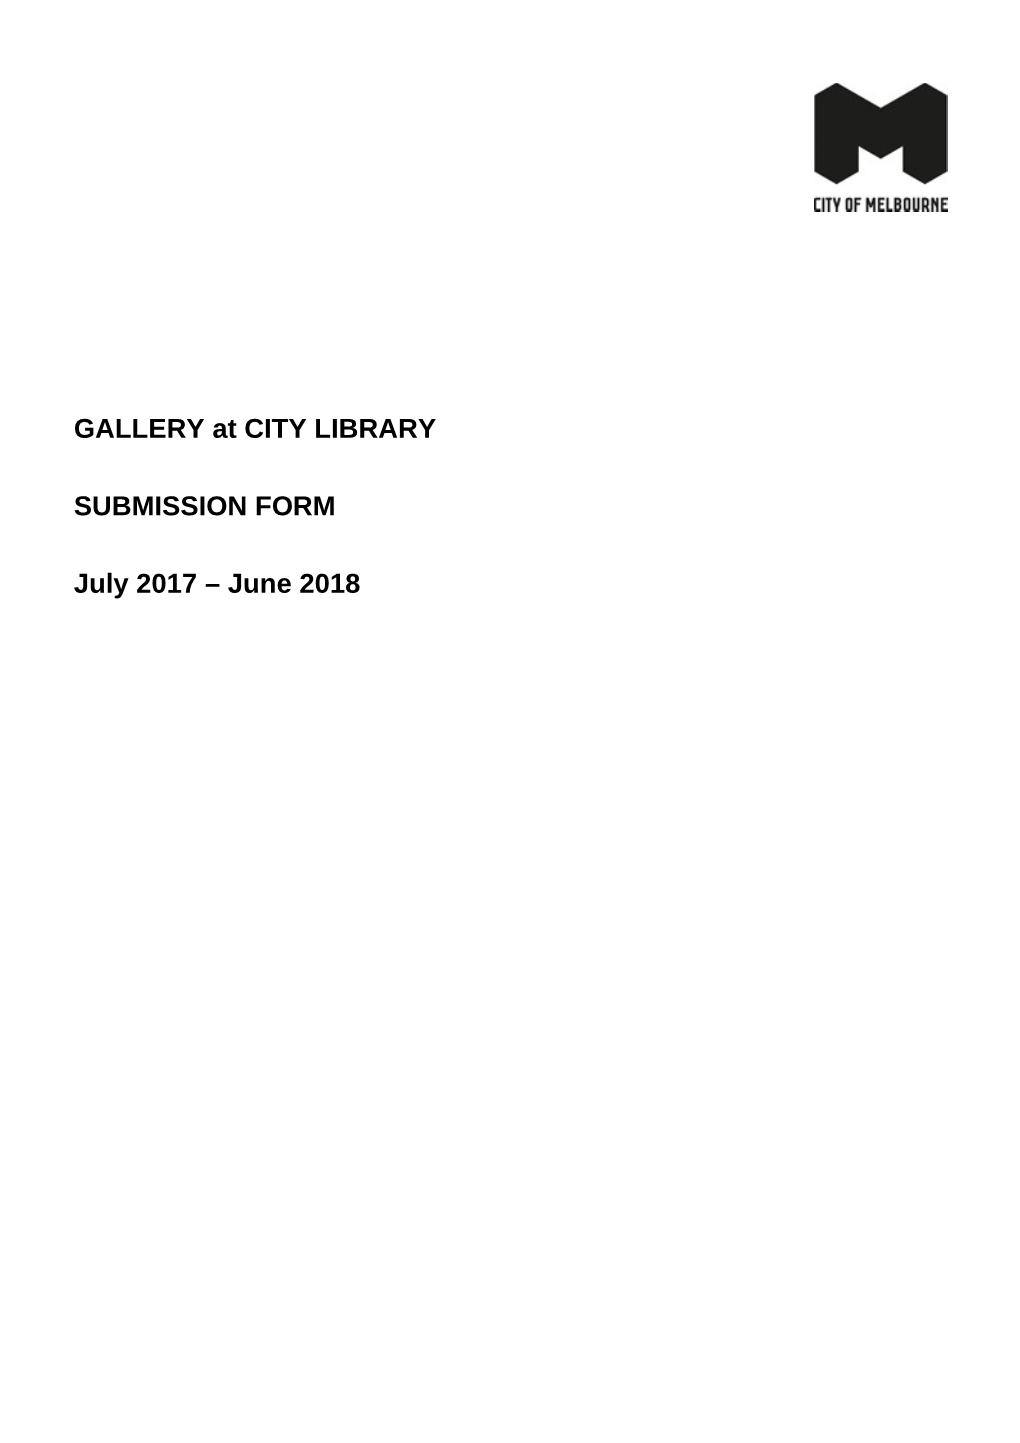 Gallery at City Library Submission Form